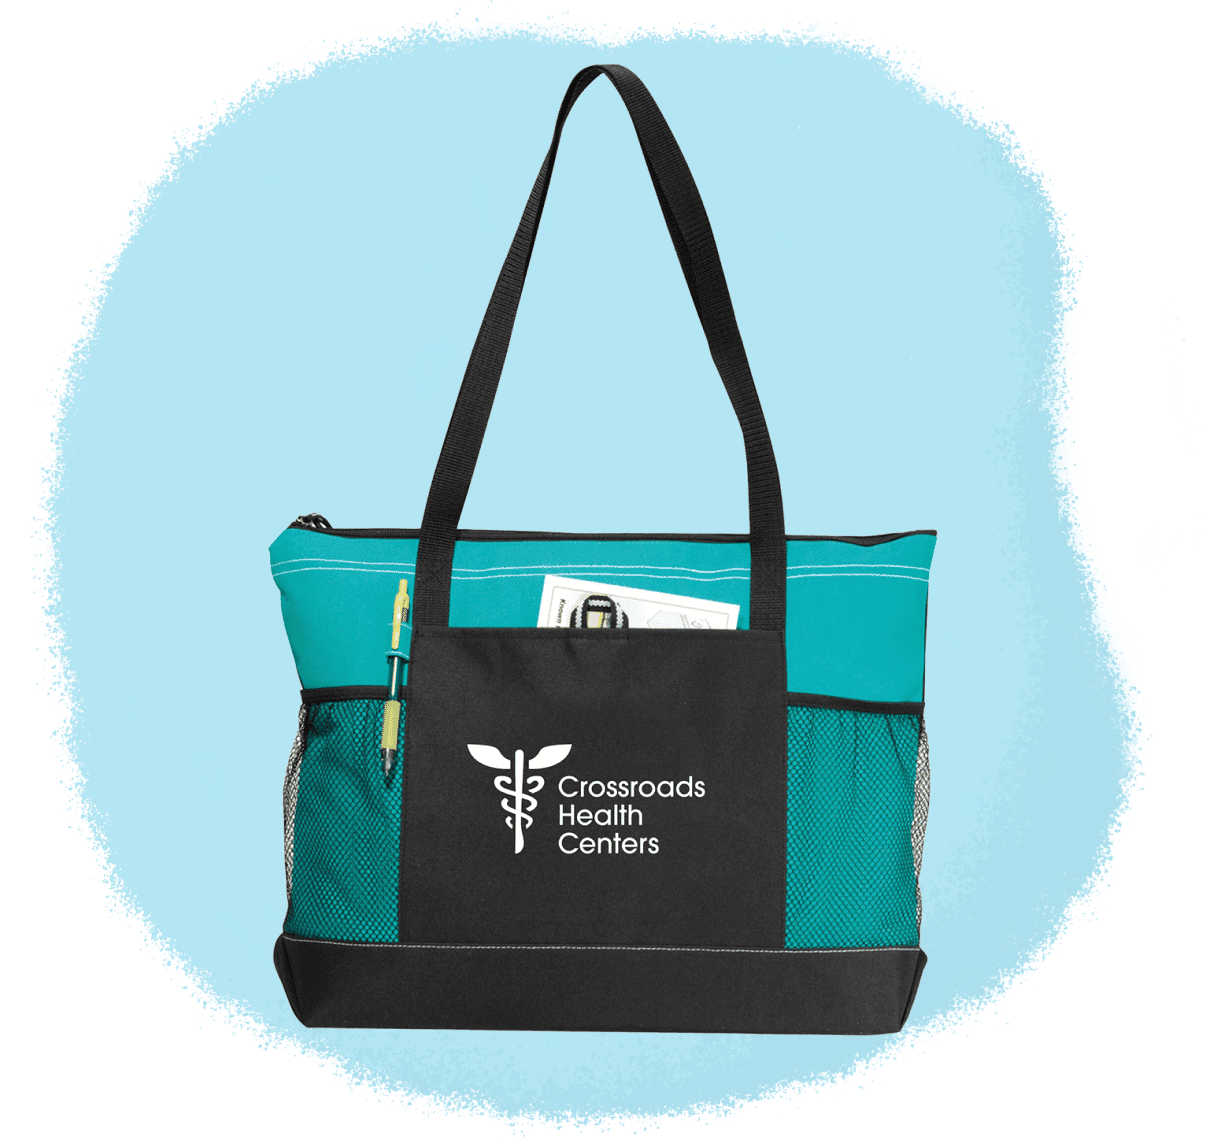 7. Conference Tote